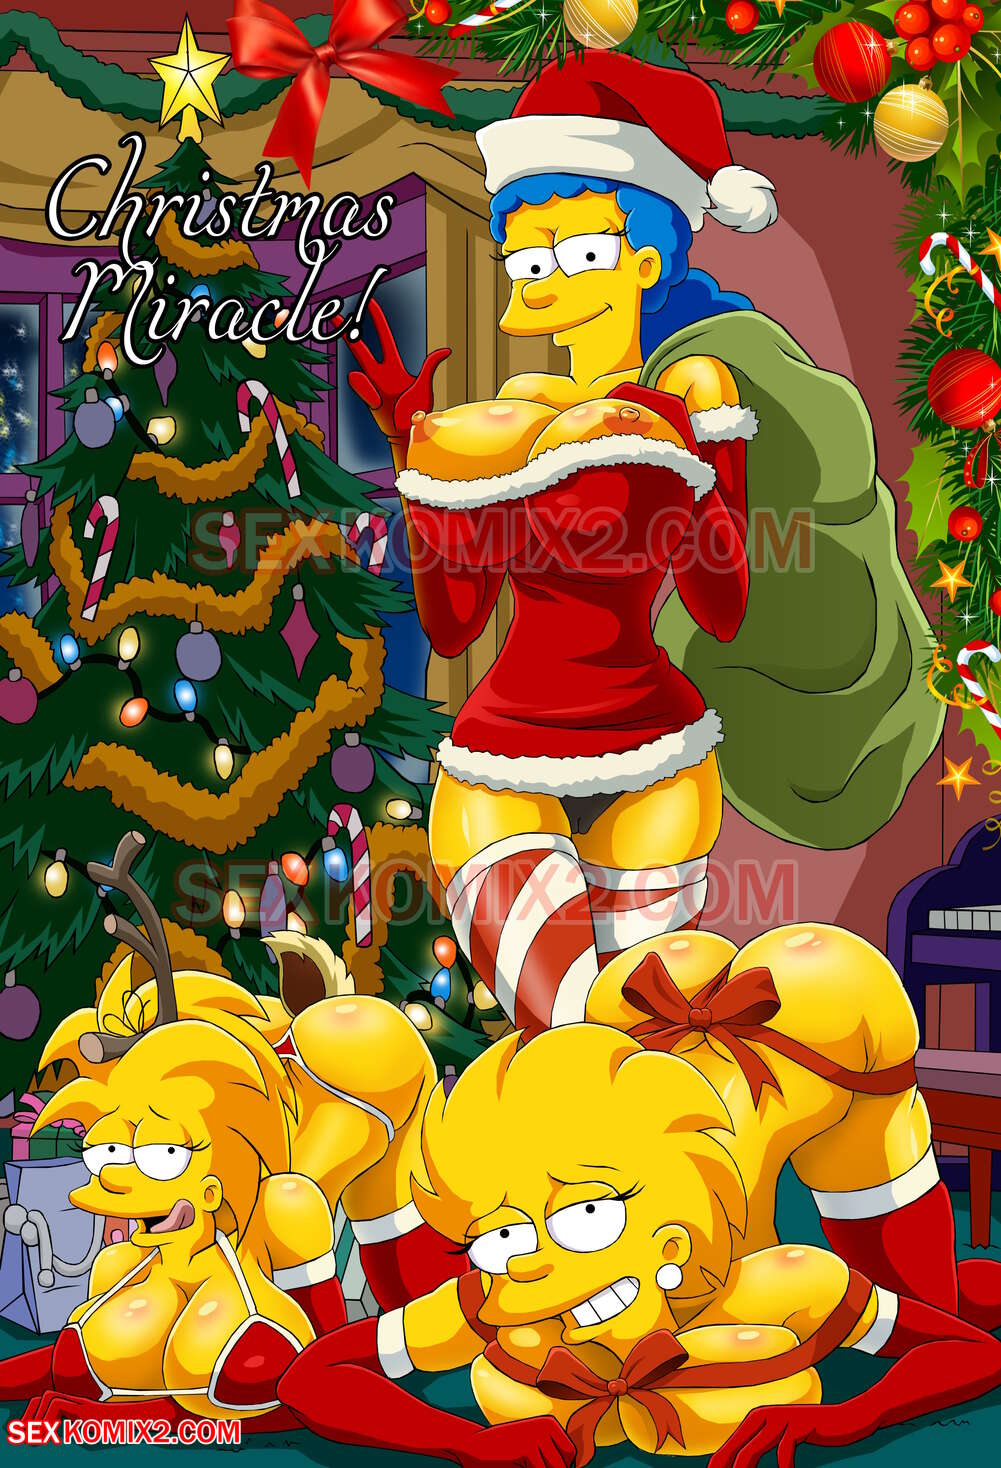 Watch Porn Image 😈 Porn comic The Simpsons. Christmas Miracle. by sexkomix2.com ...